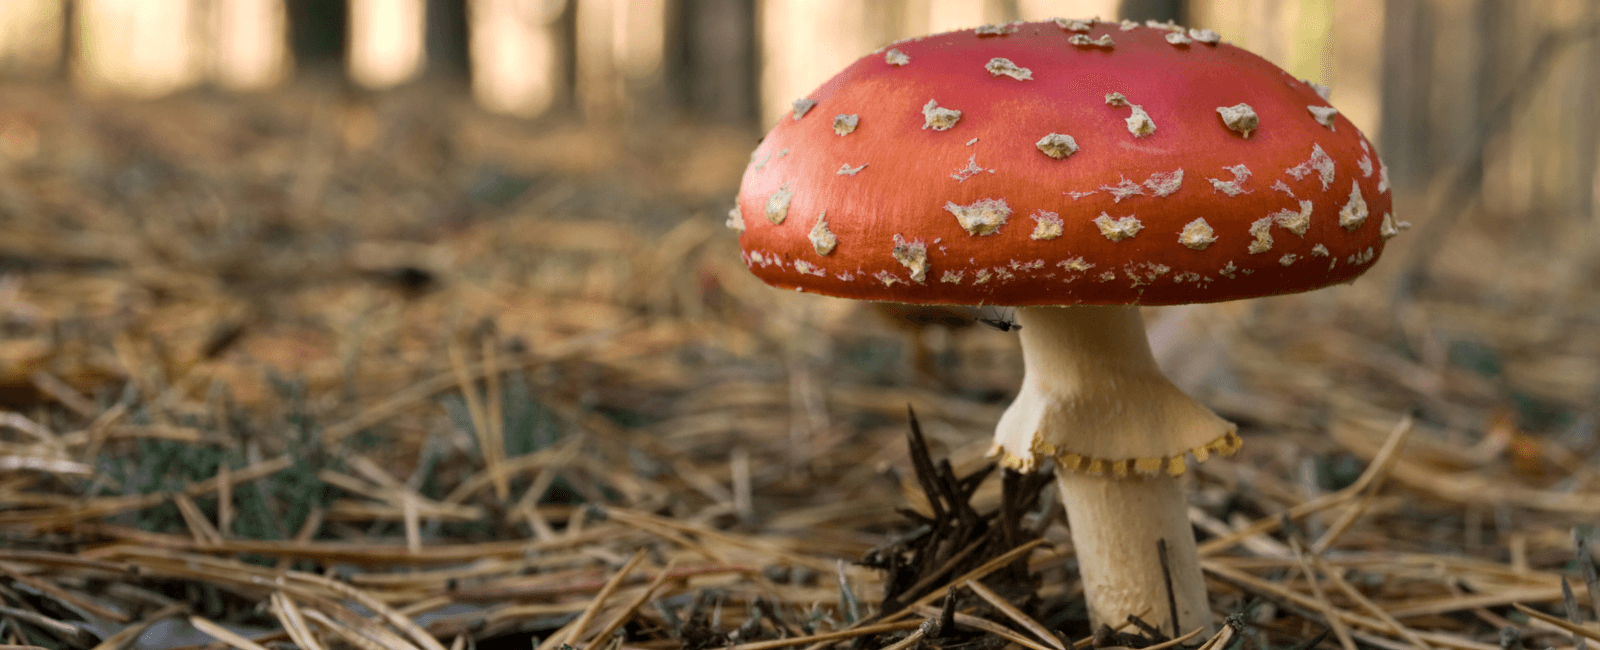 A Complete Guide to Identifying and Avoiding Toxic Mushrooms